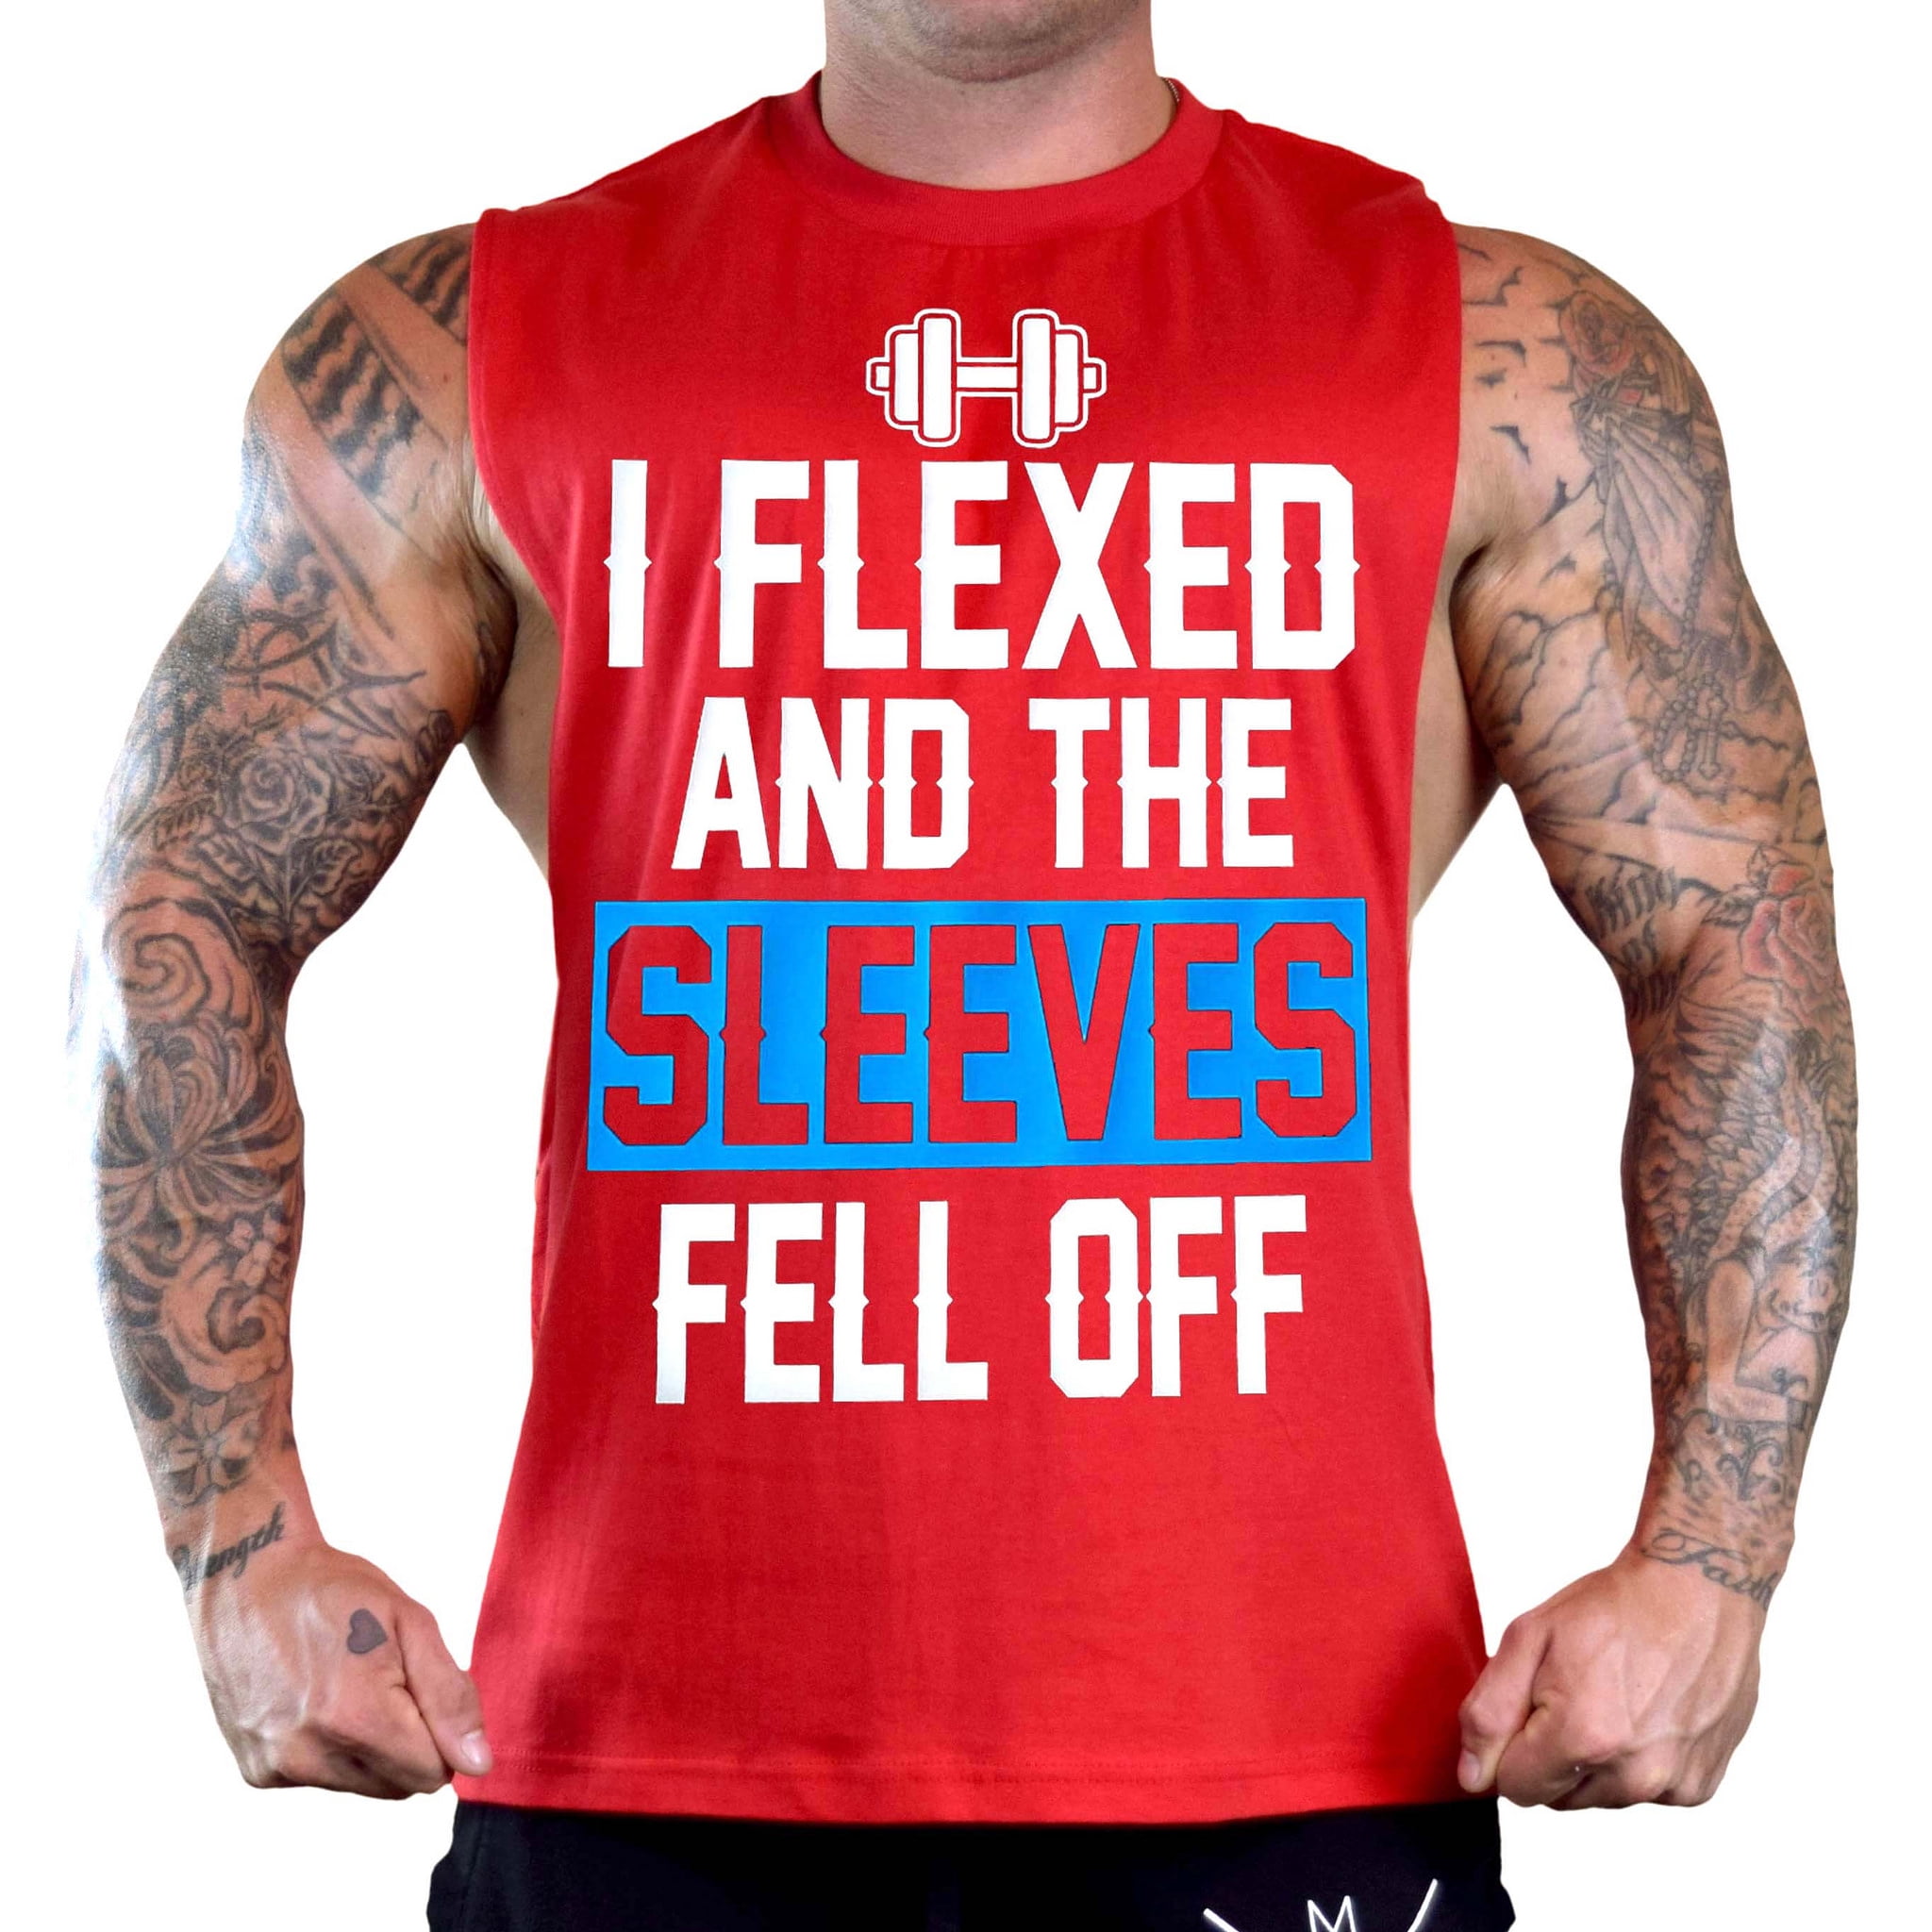 I Flexed and The Sleeves Fell Off Workout T-Shirt Bodybuilding Gym Tank Top